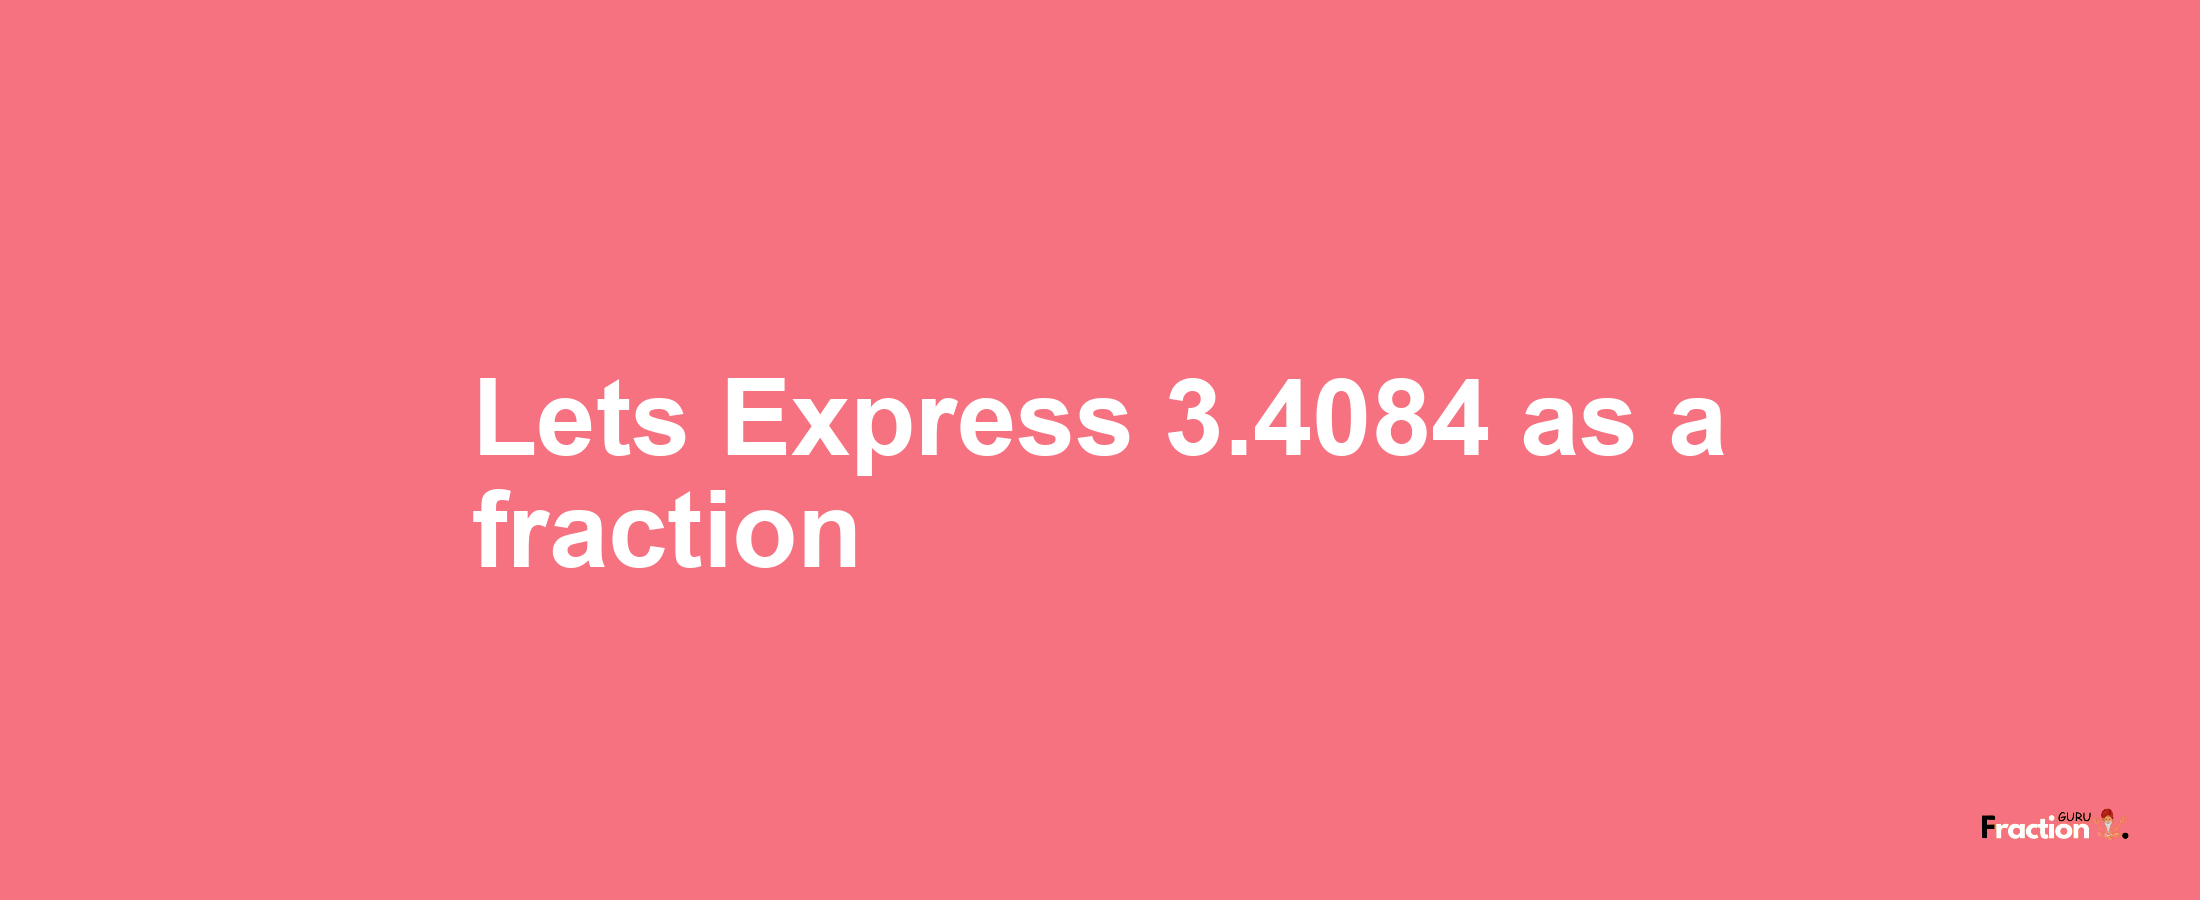 Lets Express 3.4084 as afraction